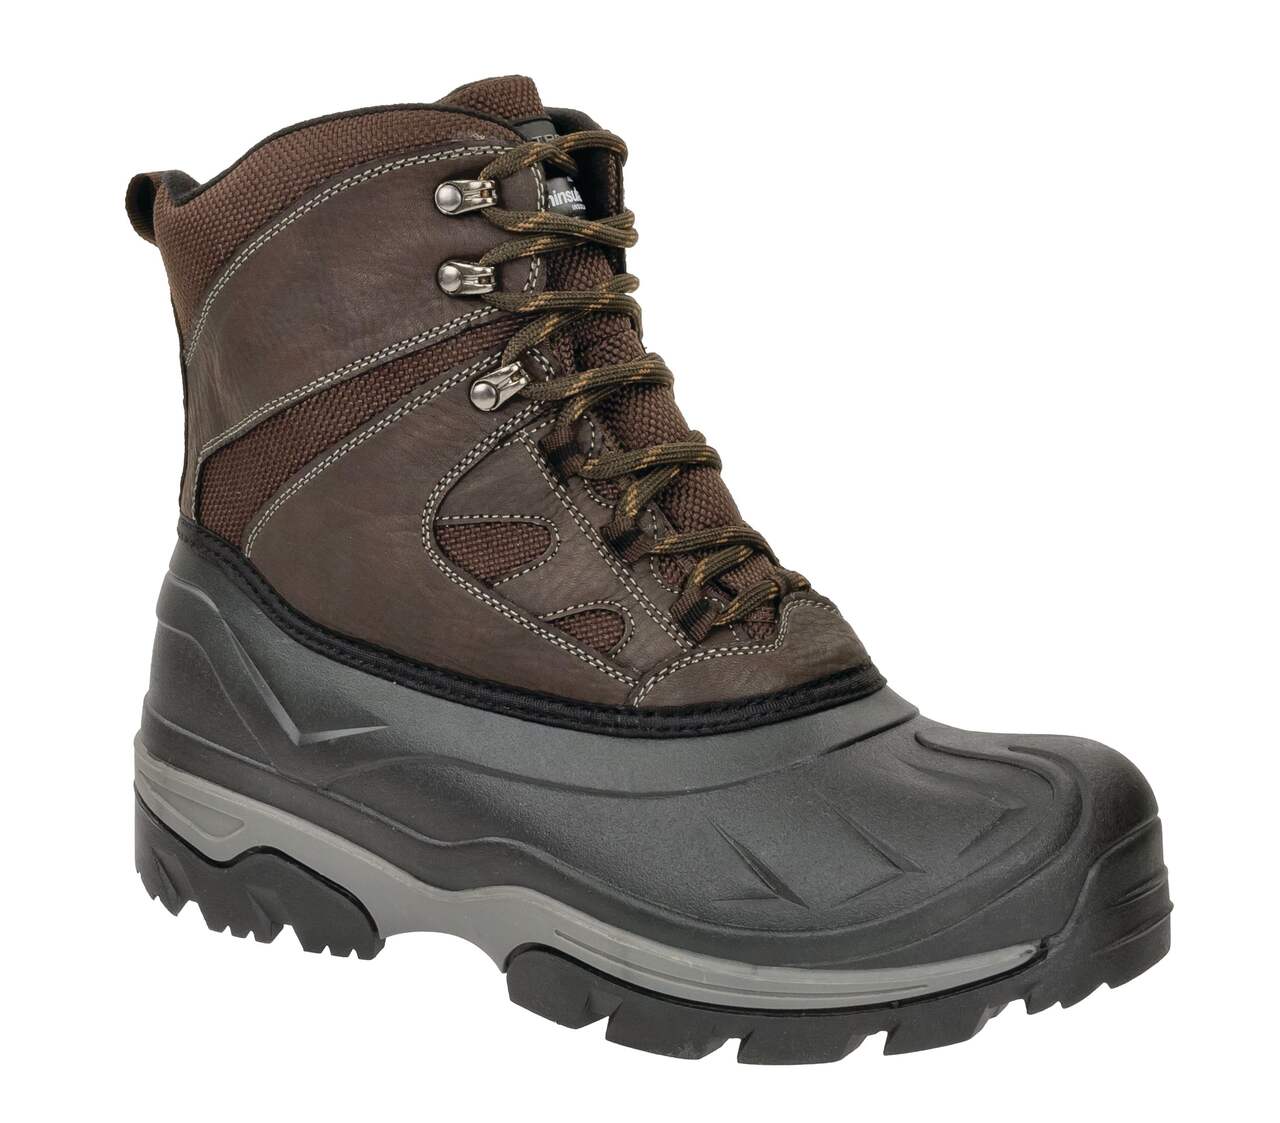 https://media-www.canadiantire.ca/product/playing/footwear-apparel/winter-footwear-apparel/1870893/nordic-boot-m11-88bc9520-1a04-496f-b006-90cba4af2e53-jpgrendition.jpg?imdensity=1&imwidth=640&impolicy=mZoom